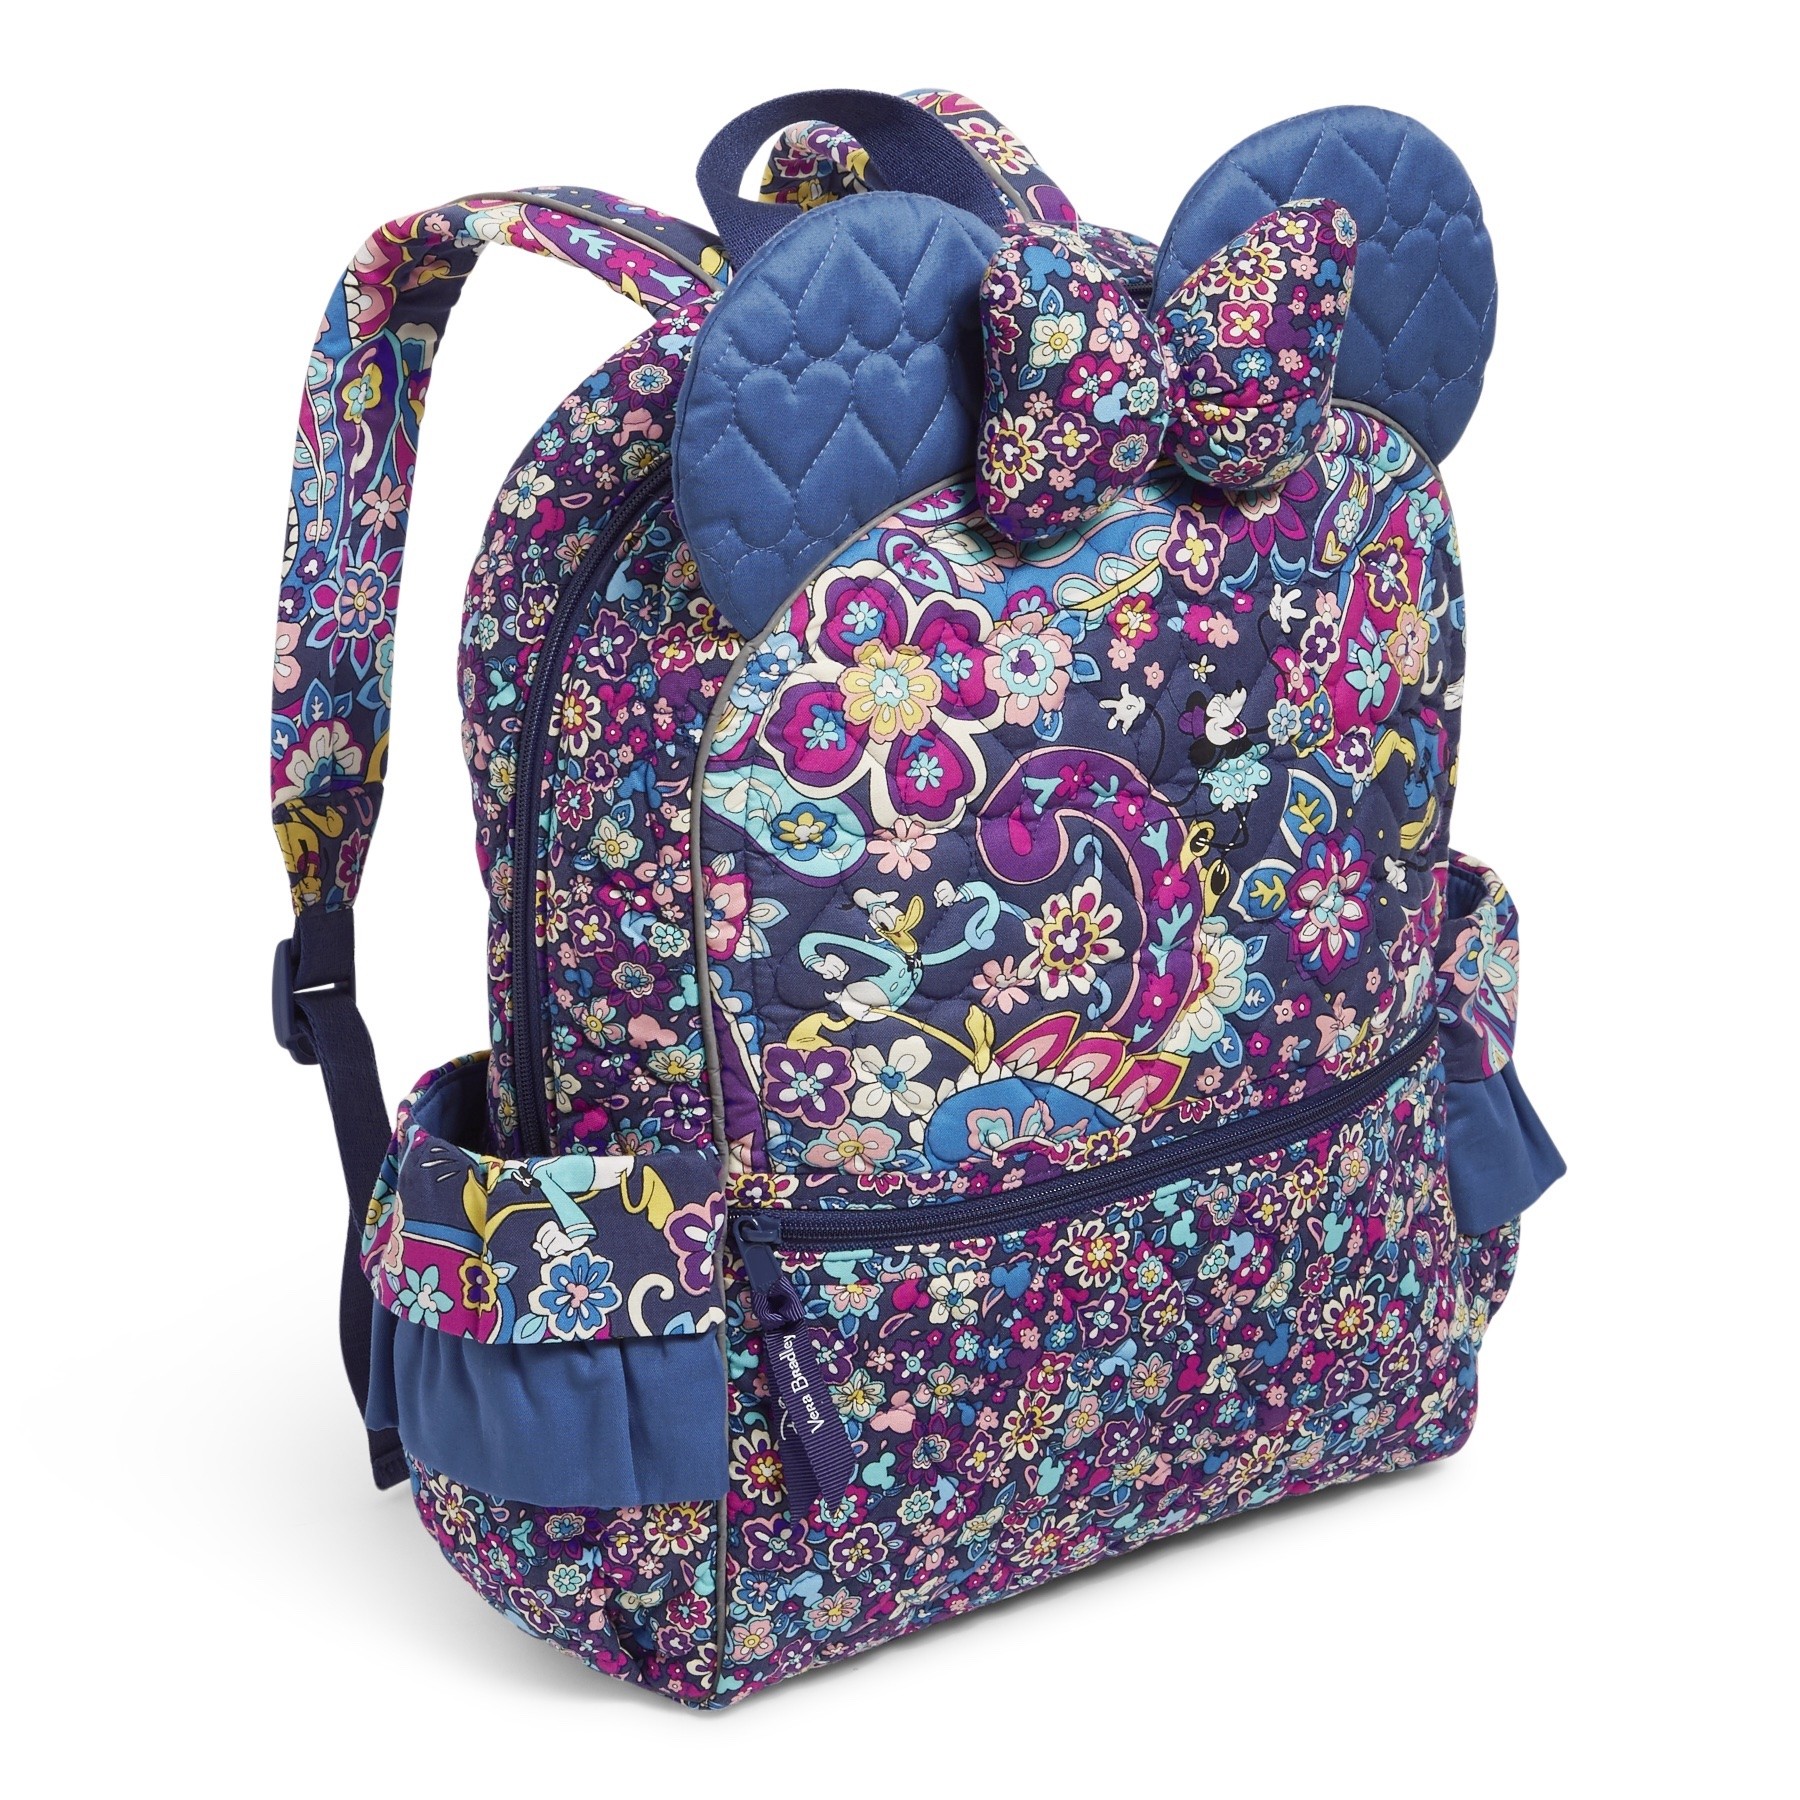 Latest Vera Bradley x Disney collection is available everywhere